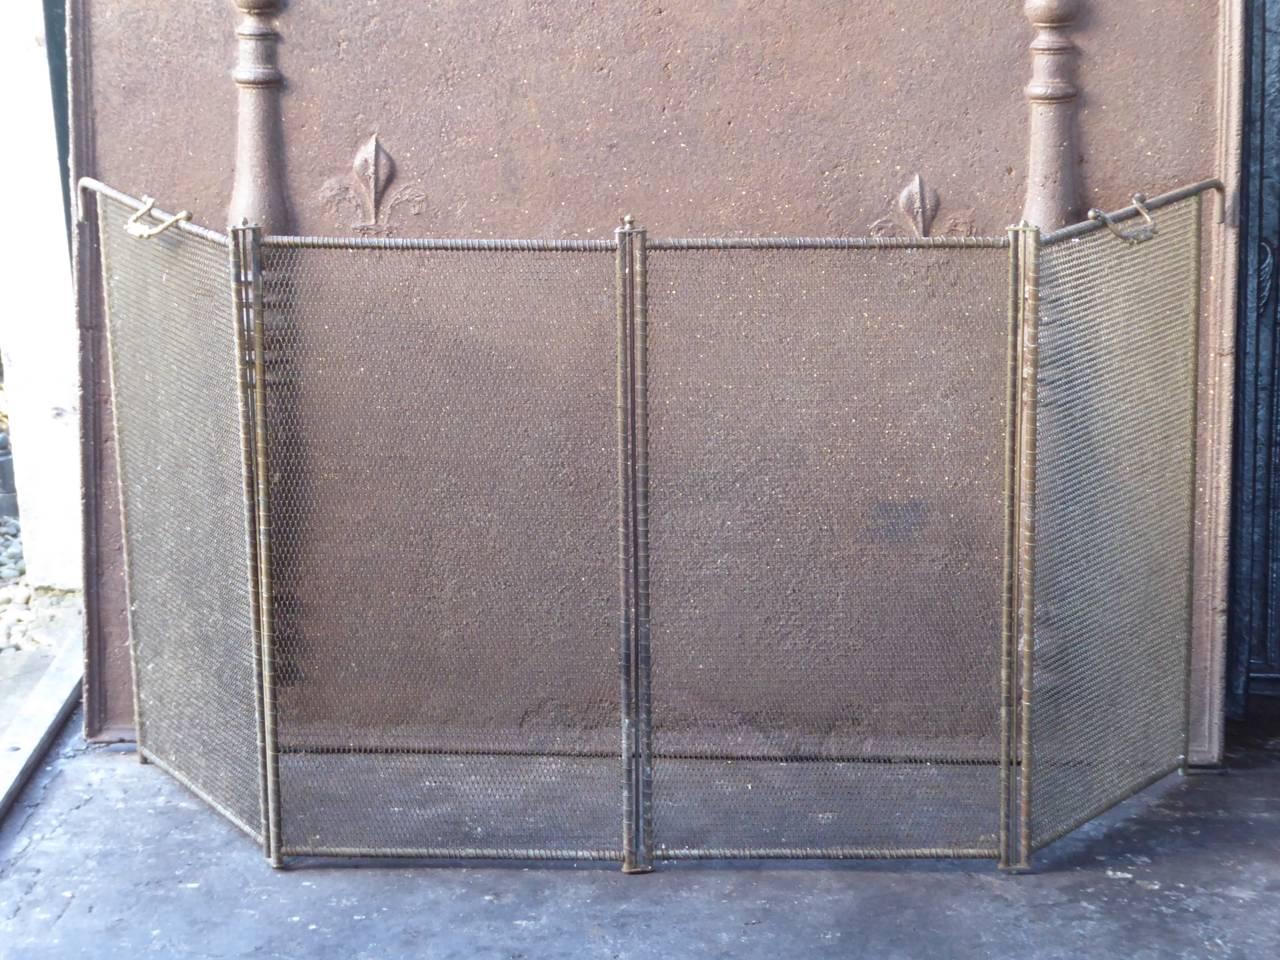 19th century French fireplace screen made of brass, iron mesh and iron.

We have a unique and specialized collection of antique and used fireplace accessories consisting of more than 1000 listings at 1stdibs. Amongst others, we always have 300+